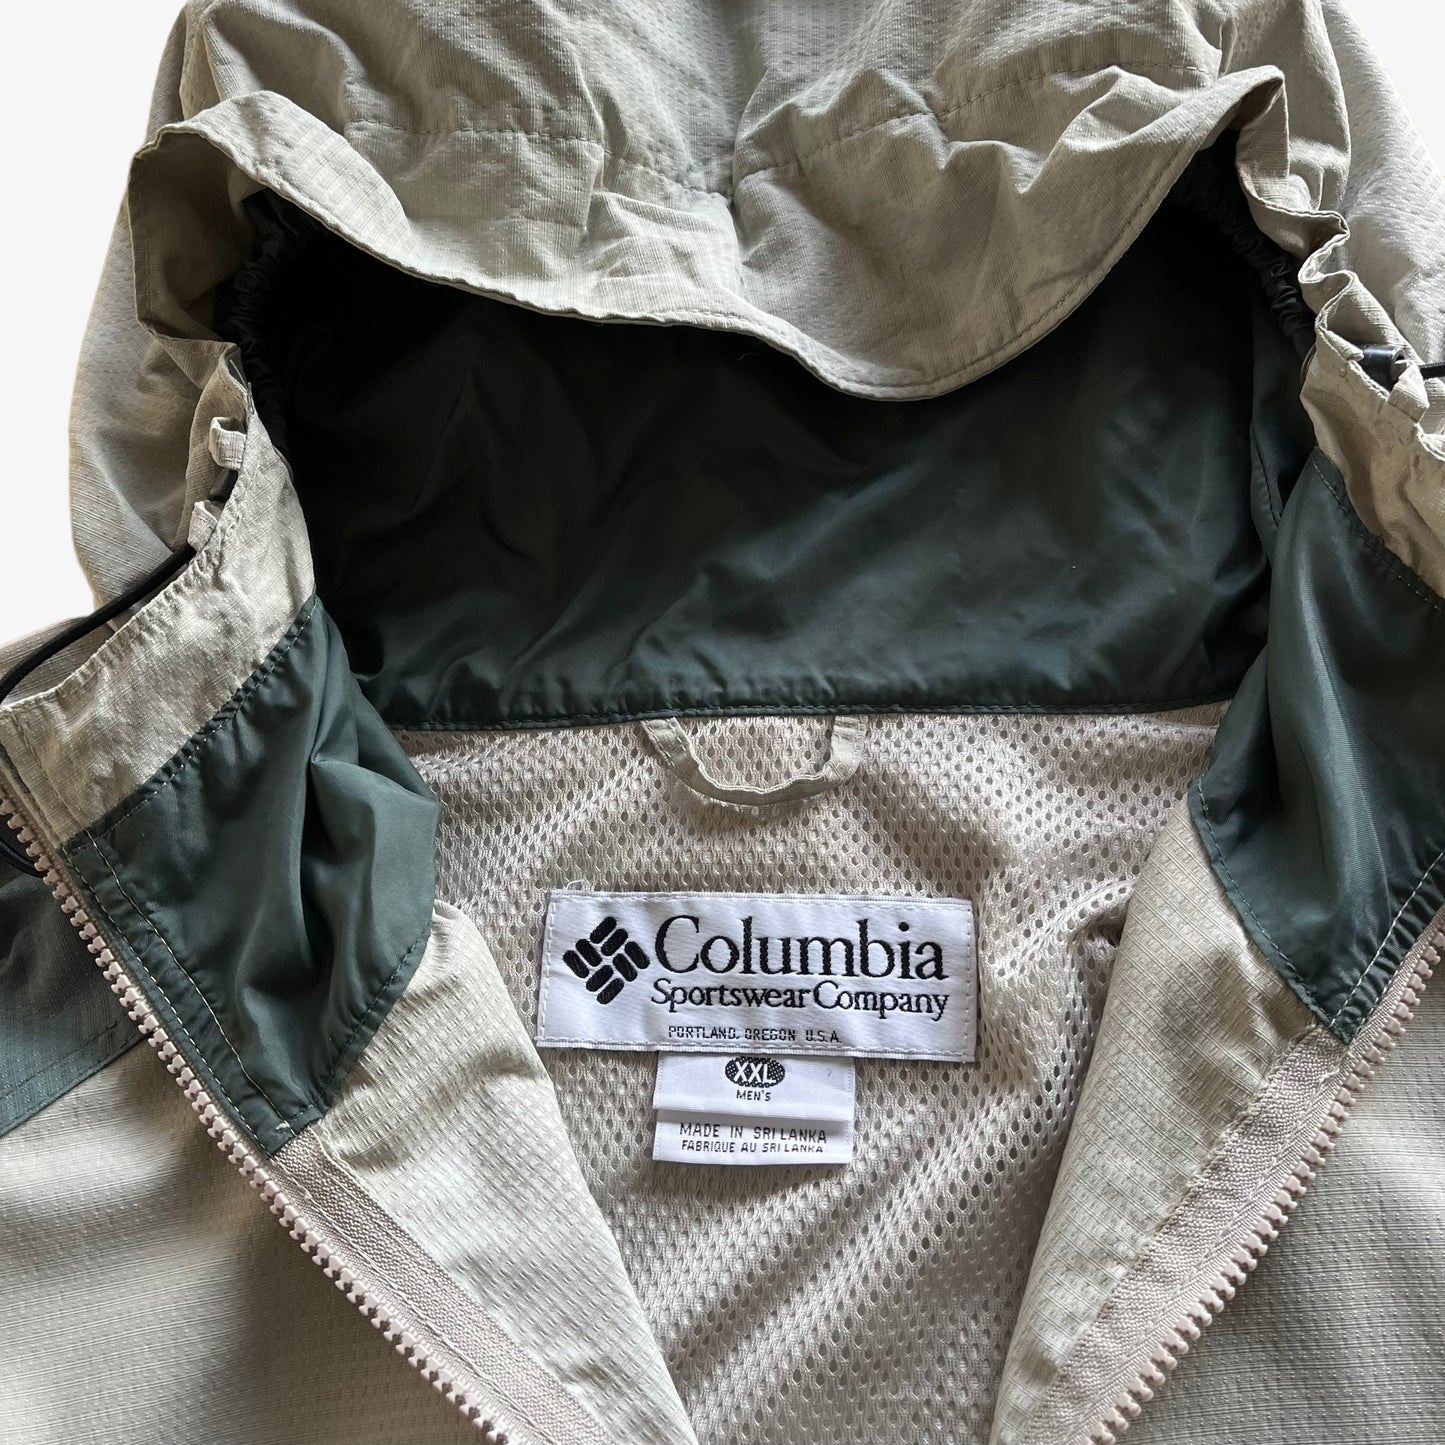 Vintage 90s Mens Columbia Packable Jacket With Foldable Hood Label - Casspios Dream